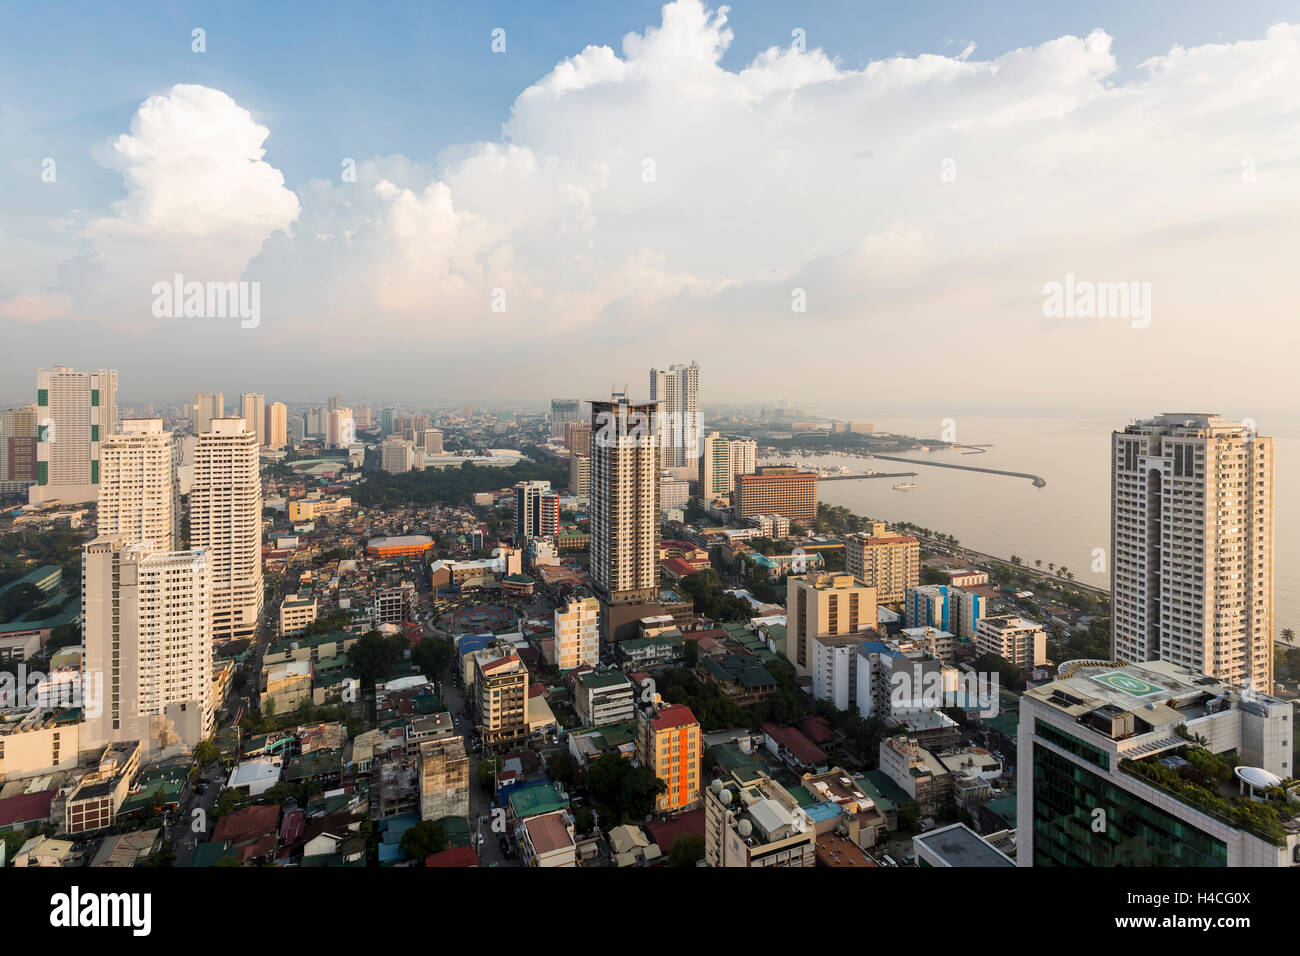 Manila, Philippines. September 2016 - View of Manila Bay from my hotel room in the Malate district. Stock Photo